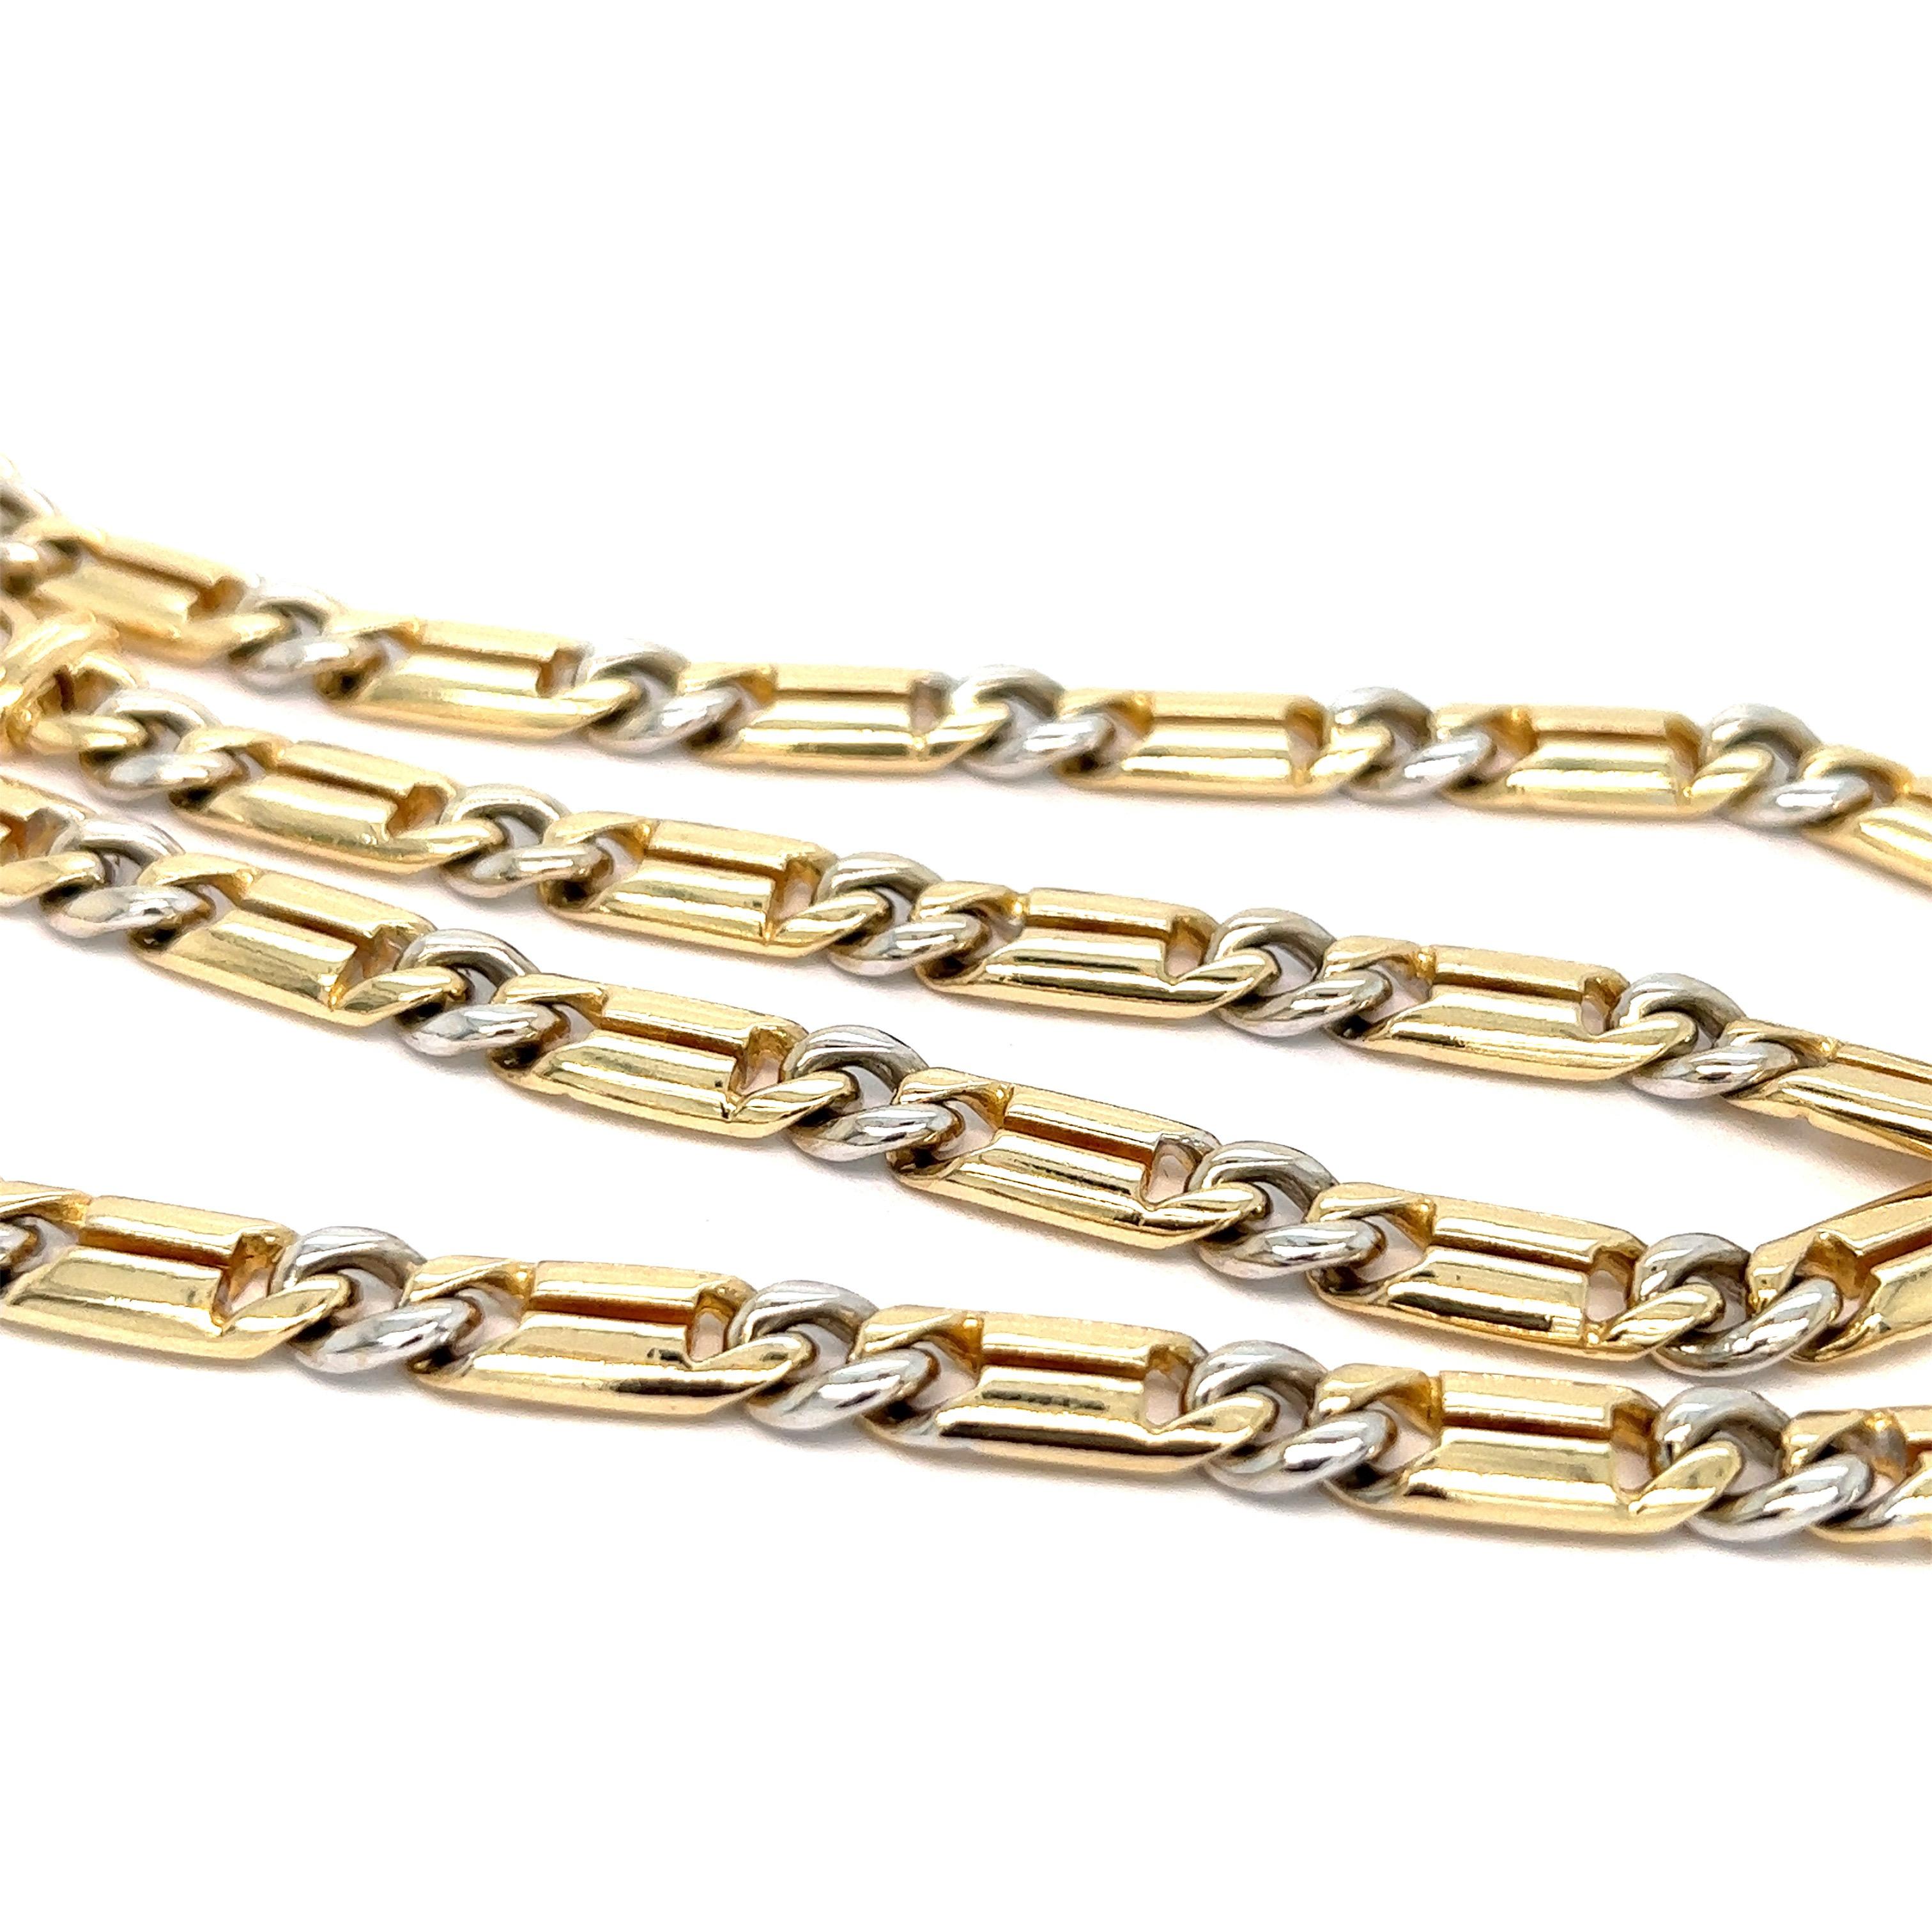 Two-tone gold link necklace

14 karat yellow and white gold

Size: width 0.25 inch, length 19.75 inches
Total weight: 60.2 grams